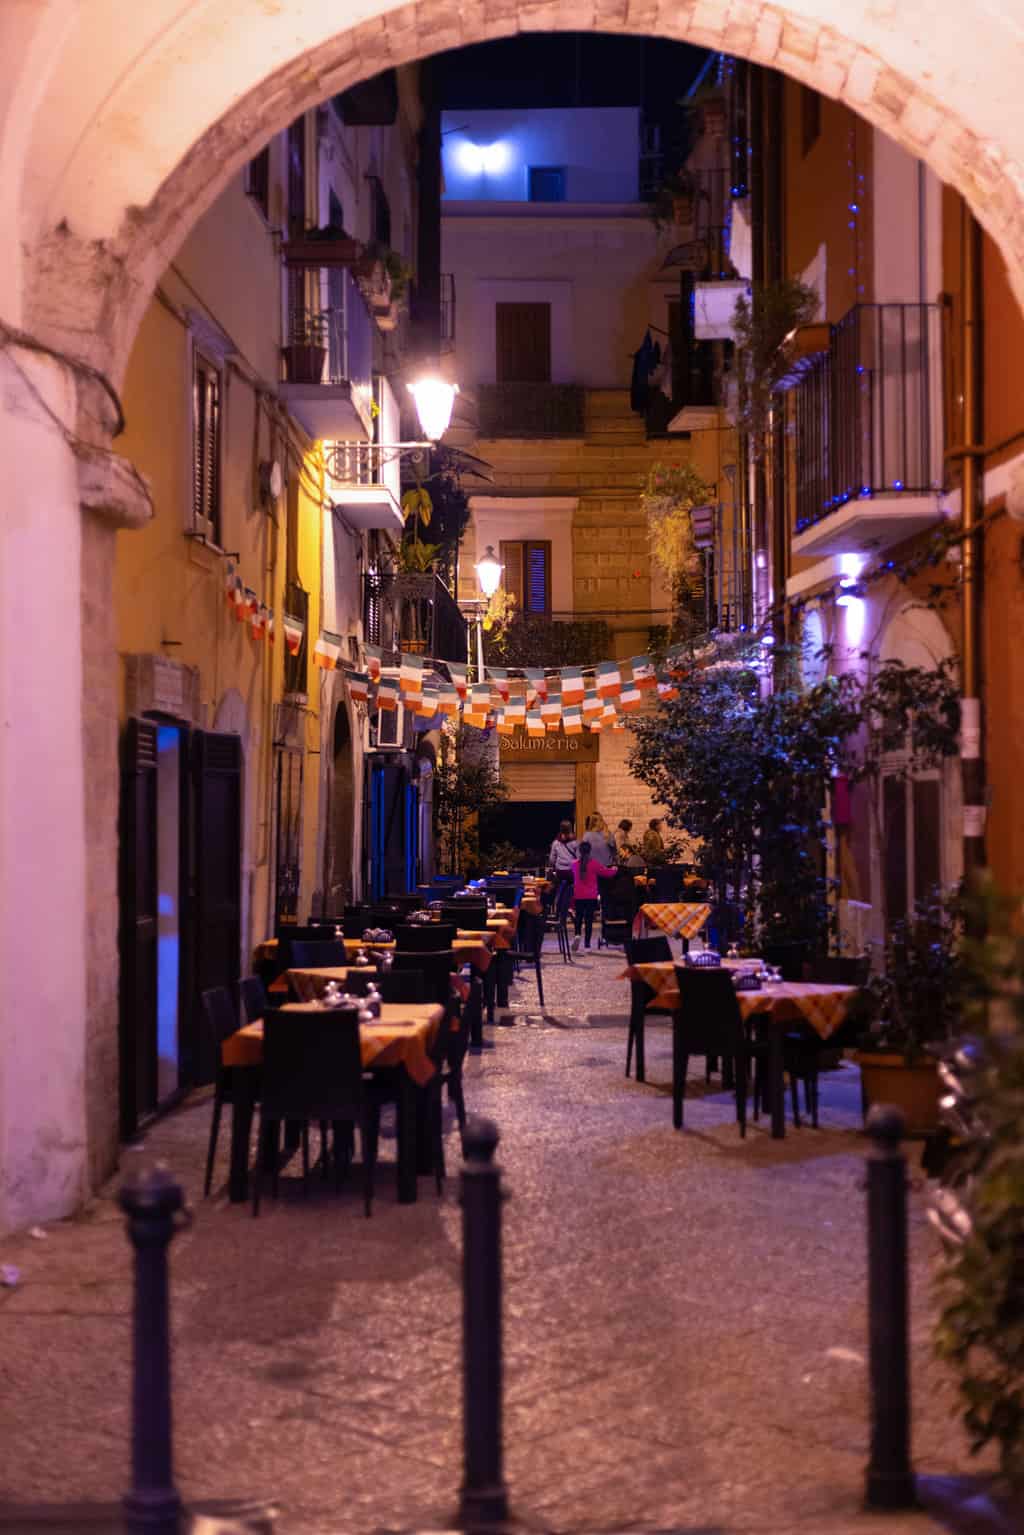 A narrow lane in Bari Italy at night with restaurant tables lining the street.